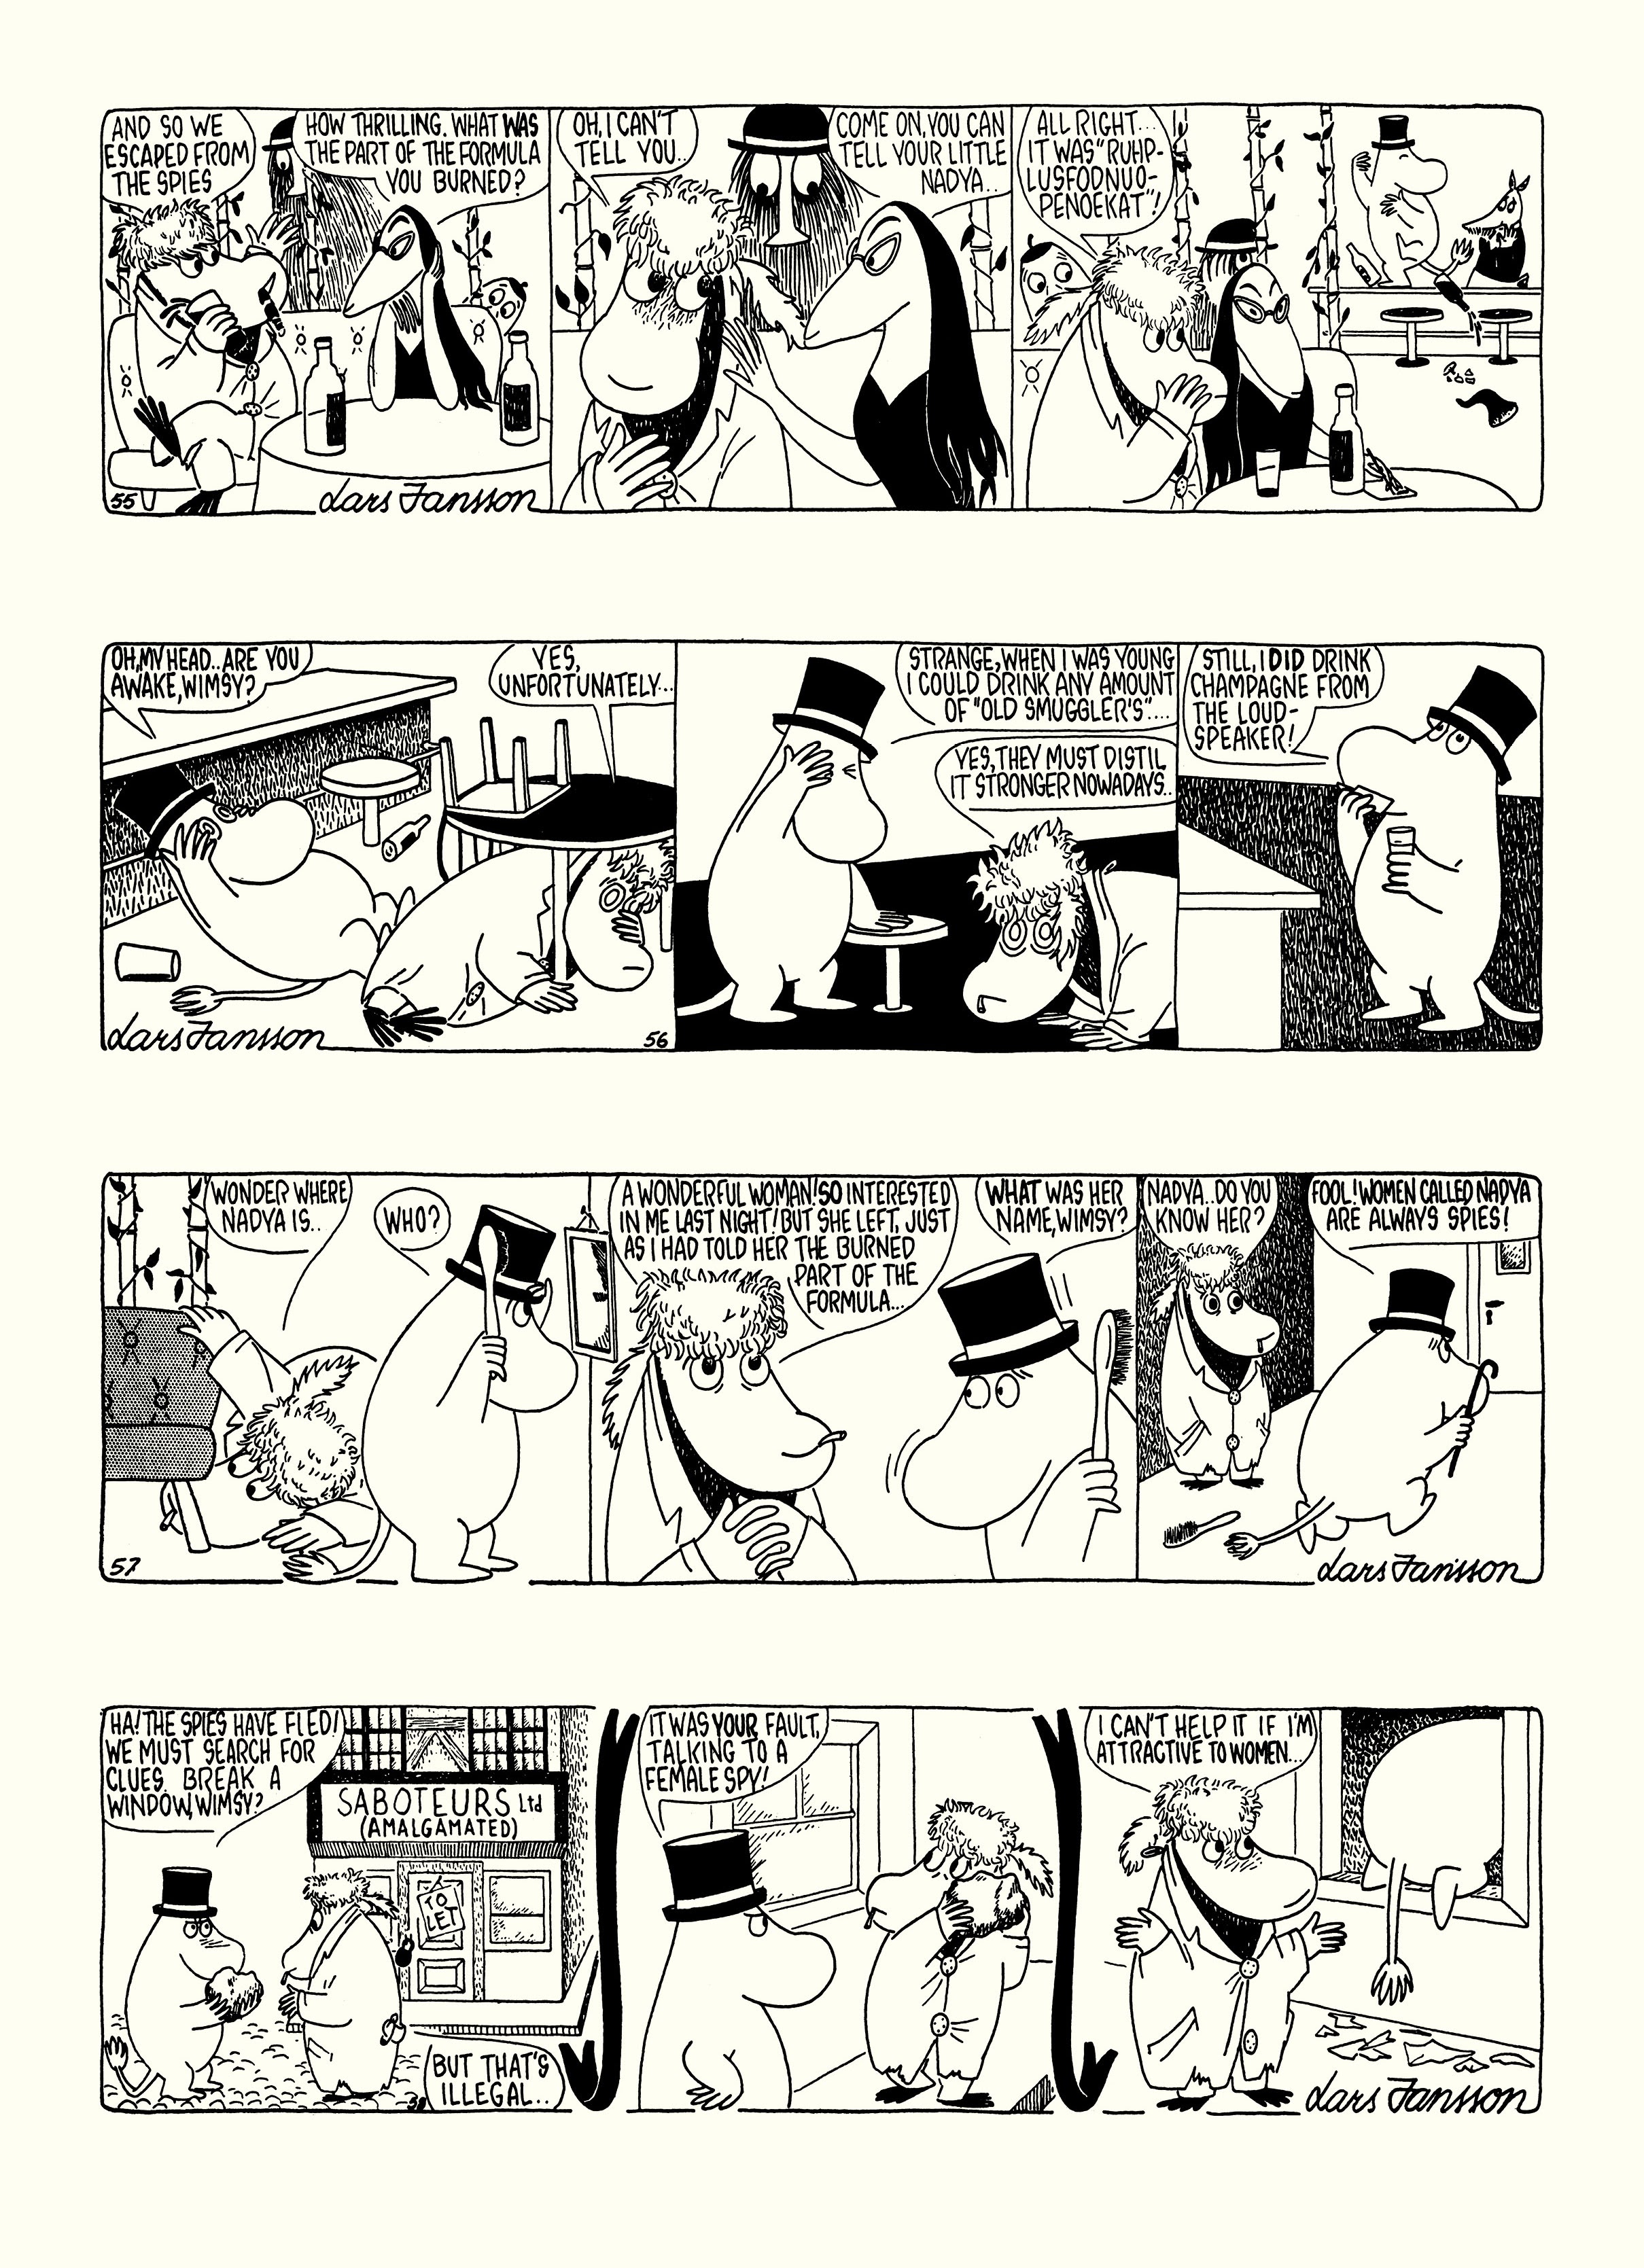 Read online Moomin: The Complete Lars Jansson Comic Strip comic -  Issue # TPB 6 - 61